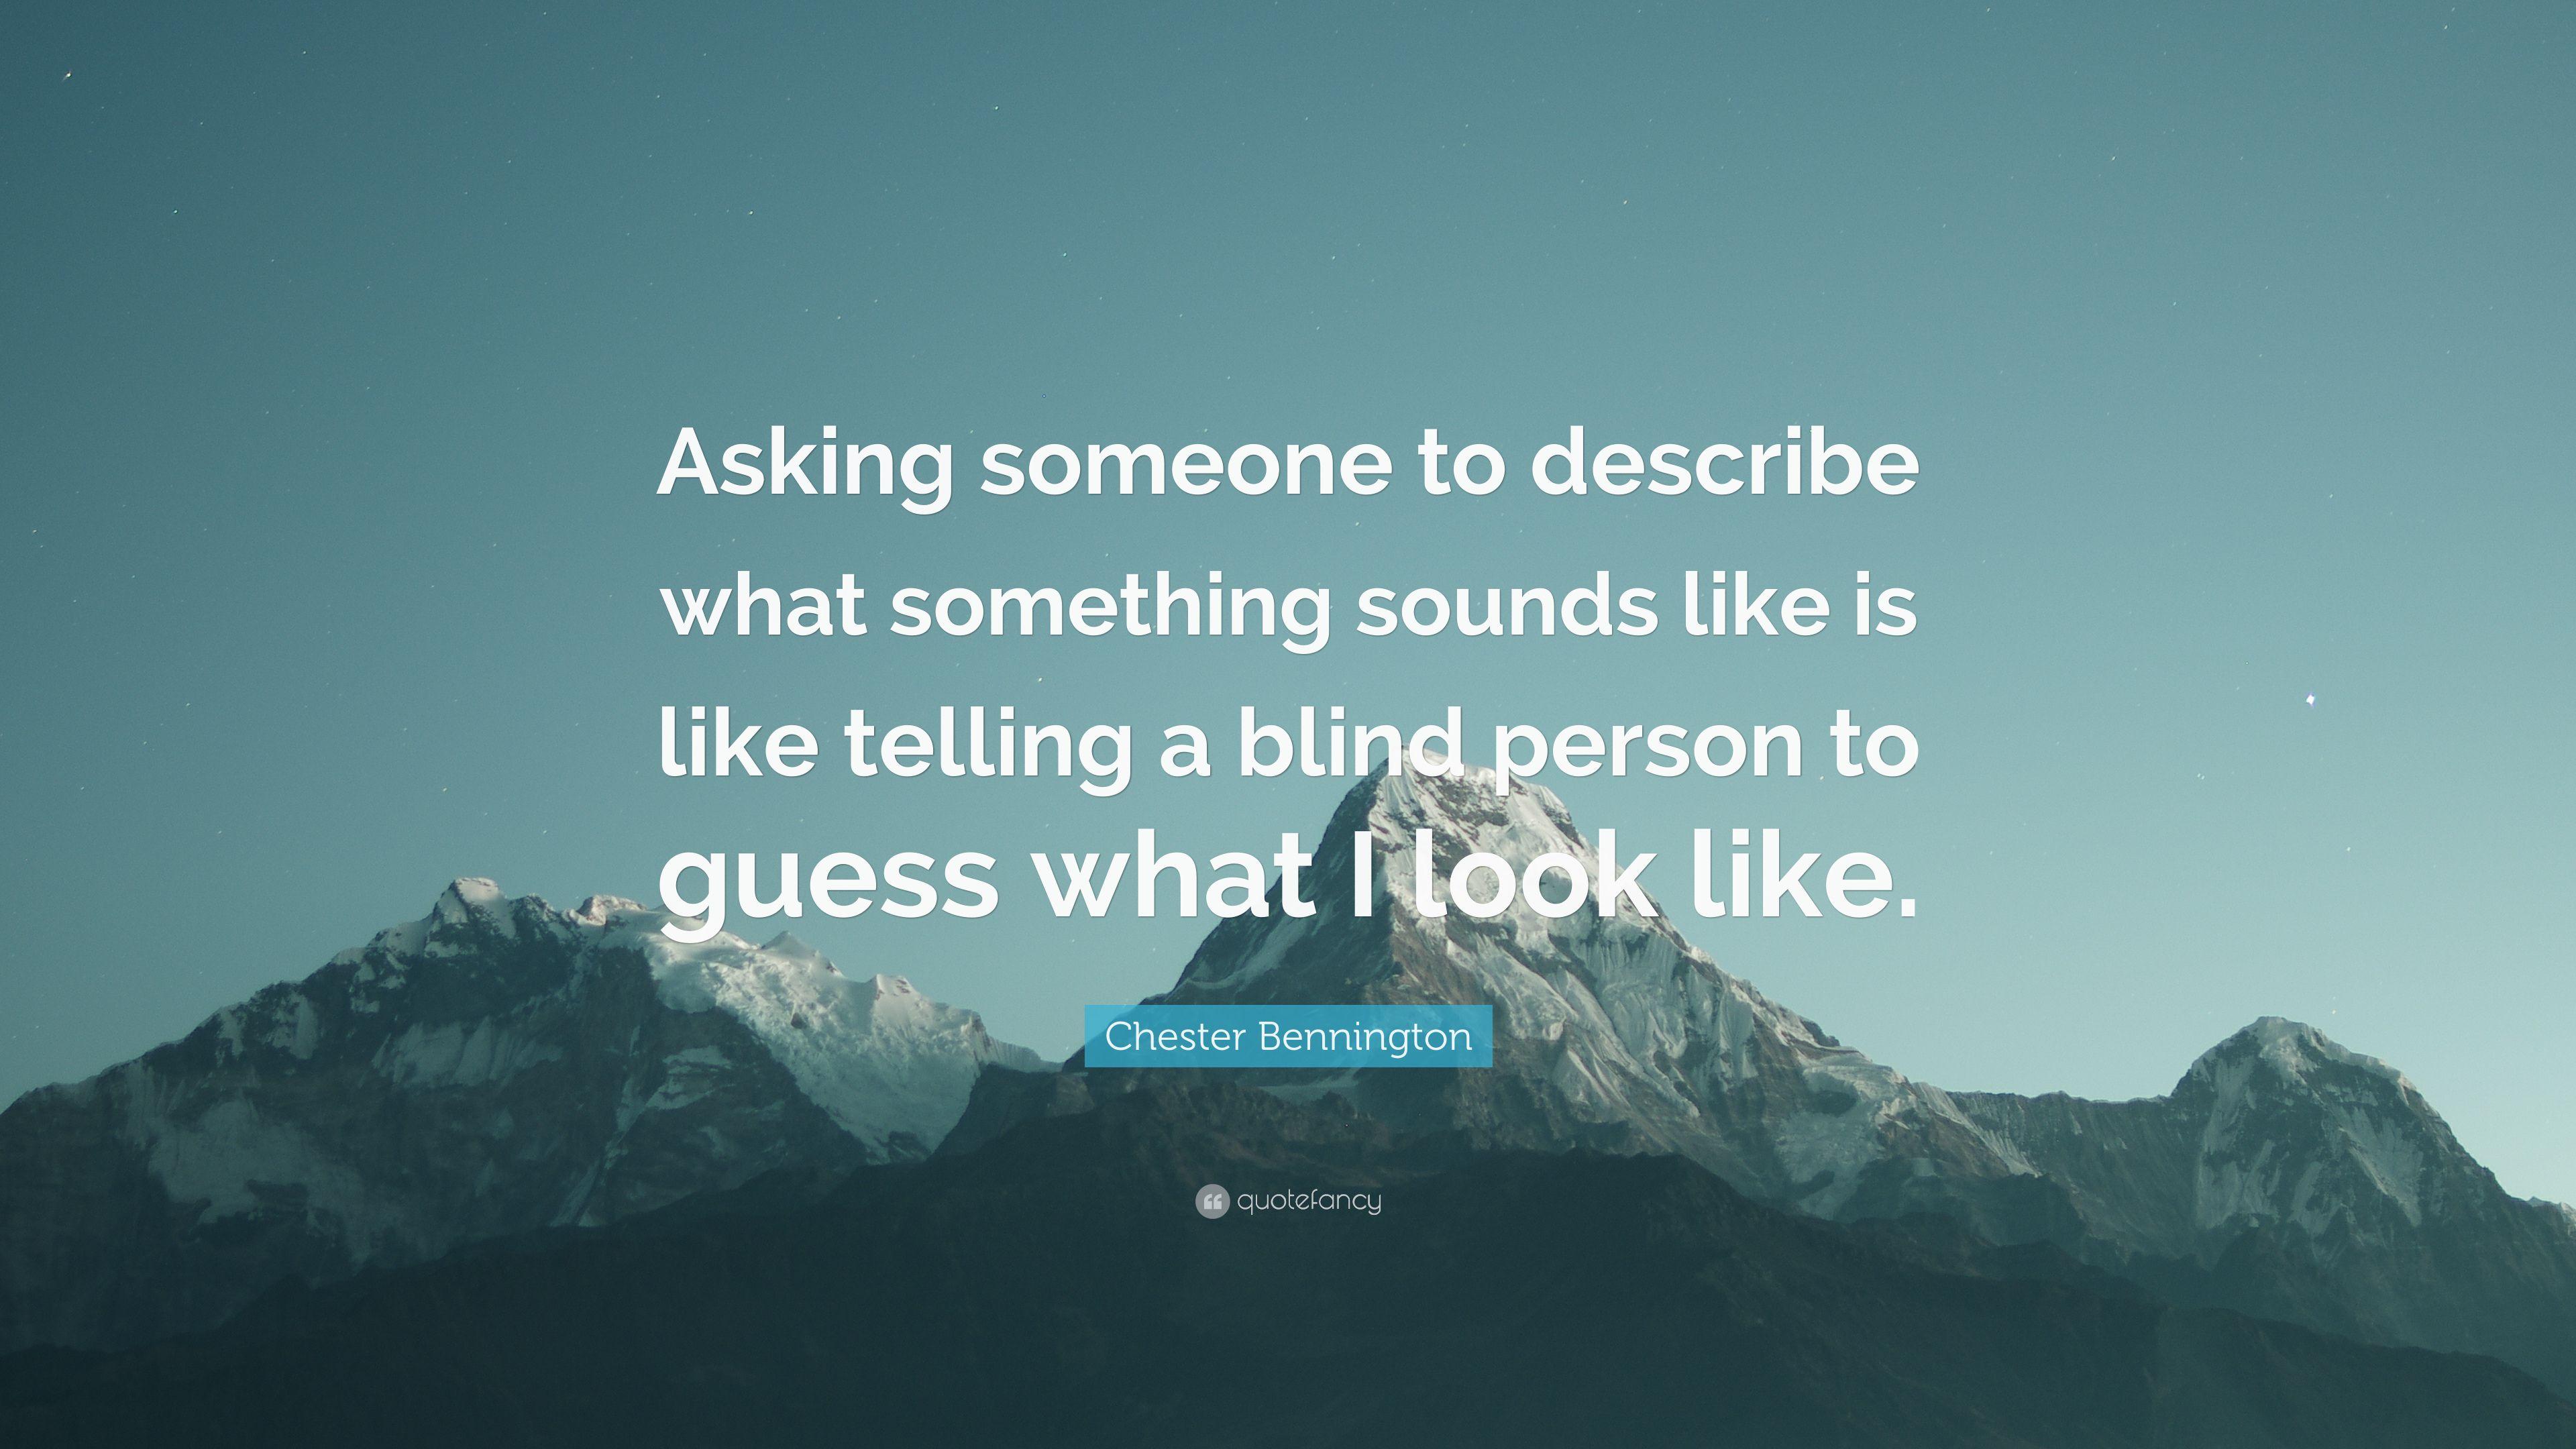 Chester Bennington Quote: “Asking someone to describe what something